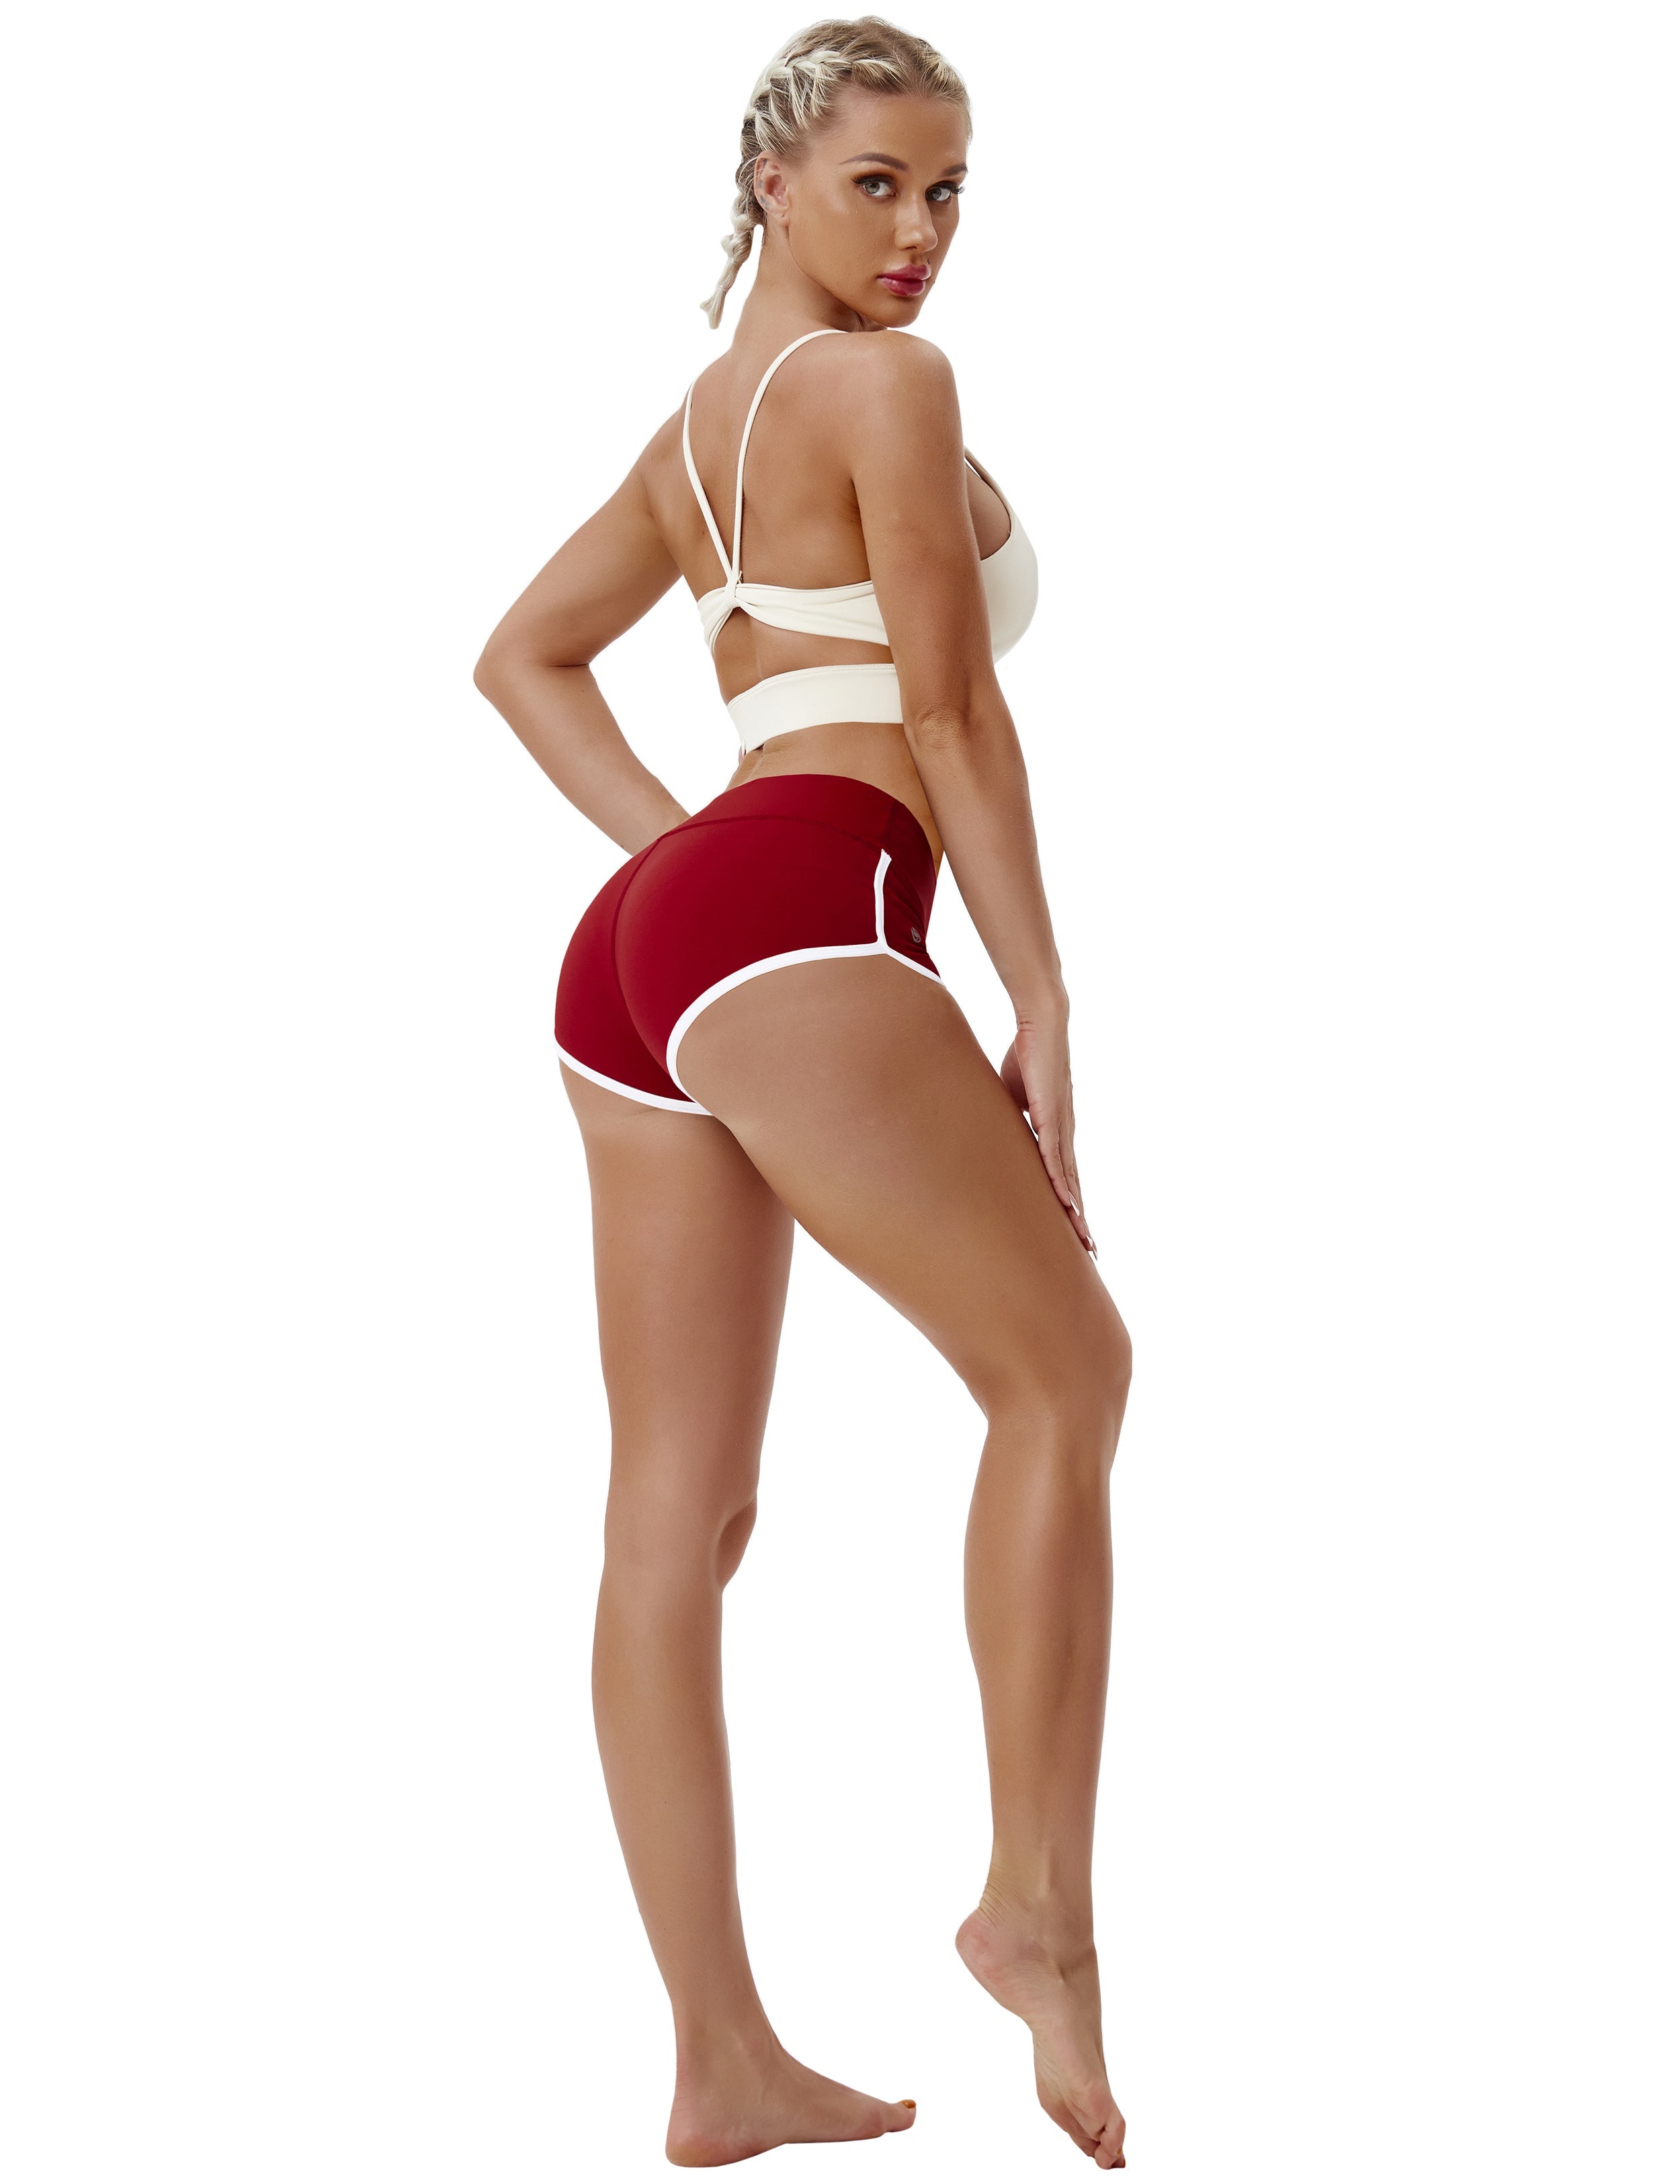 Sexy Booty Running Shorts cherryred Sleek, soft, smooth and totally comfortable: our newest sexy style is here. Softest-ever fabric High elasticity High density 4-way stretch Fabric doesn't attract lint easily No see-through Moisture-wicking Machine wash 75%Nylon/25%Spandex